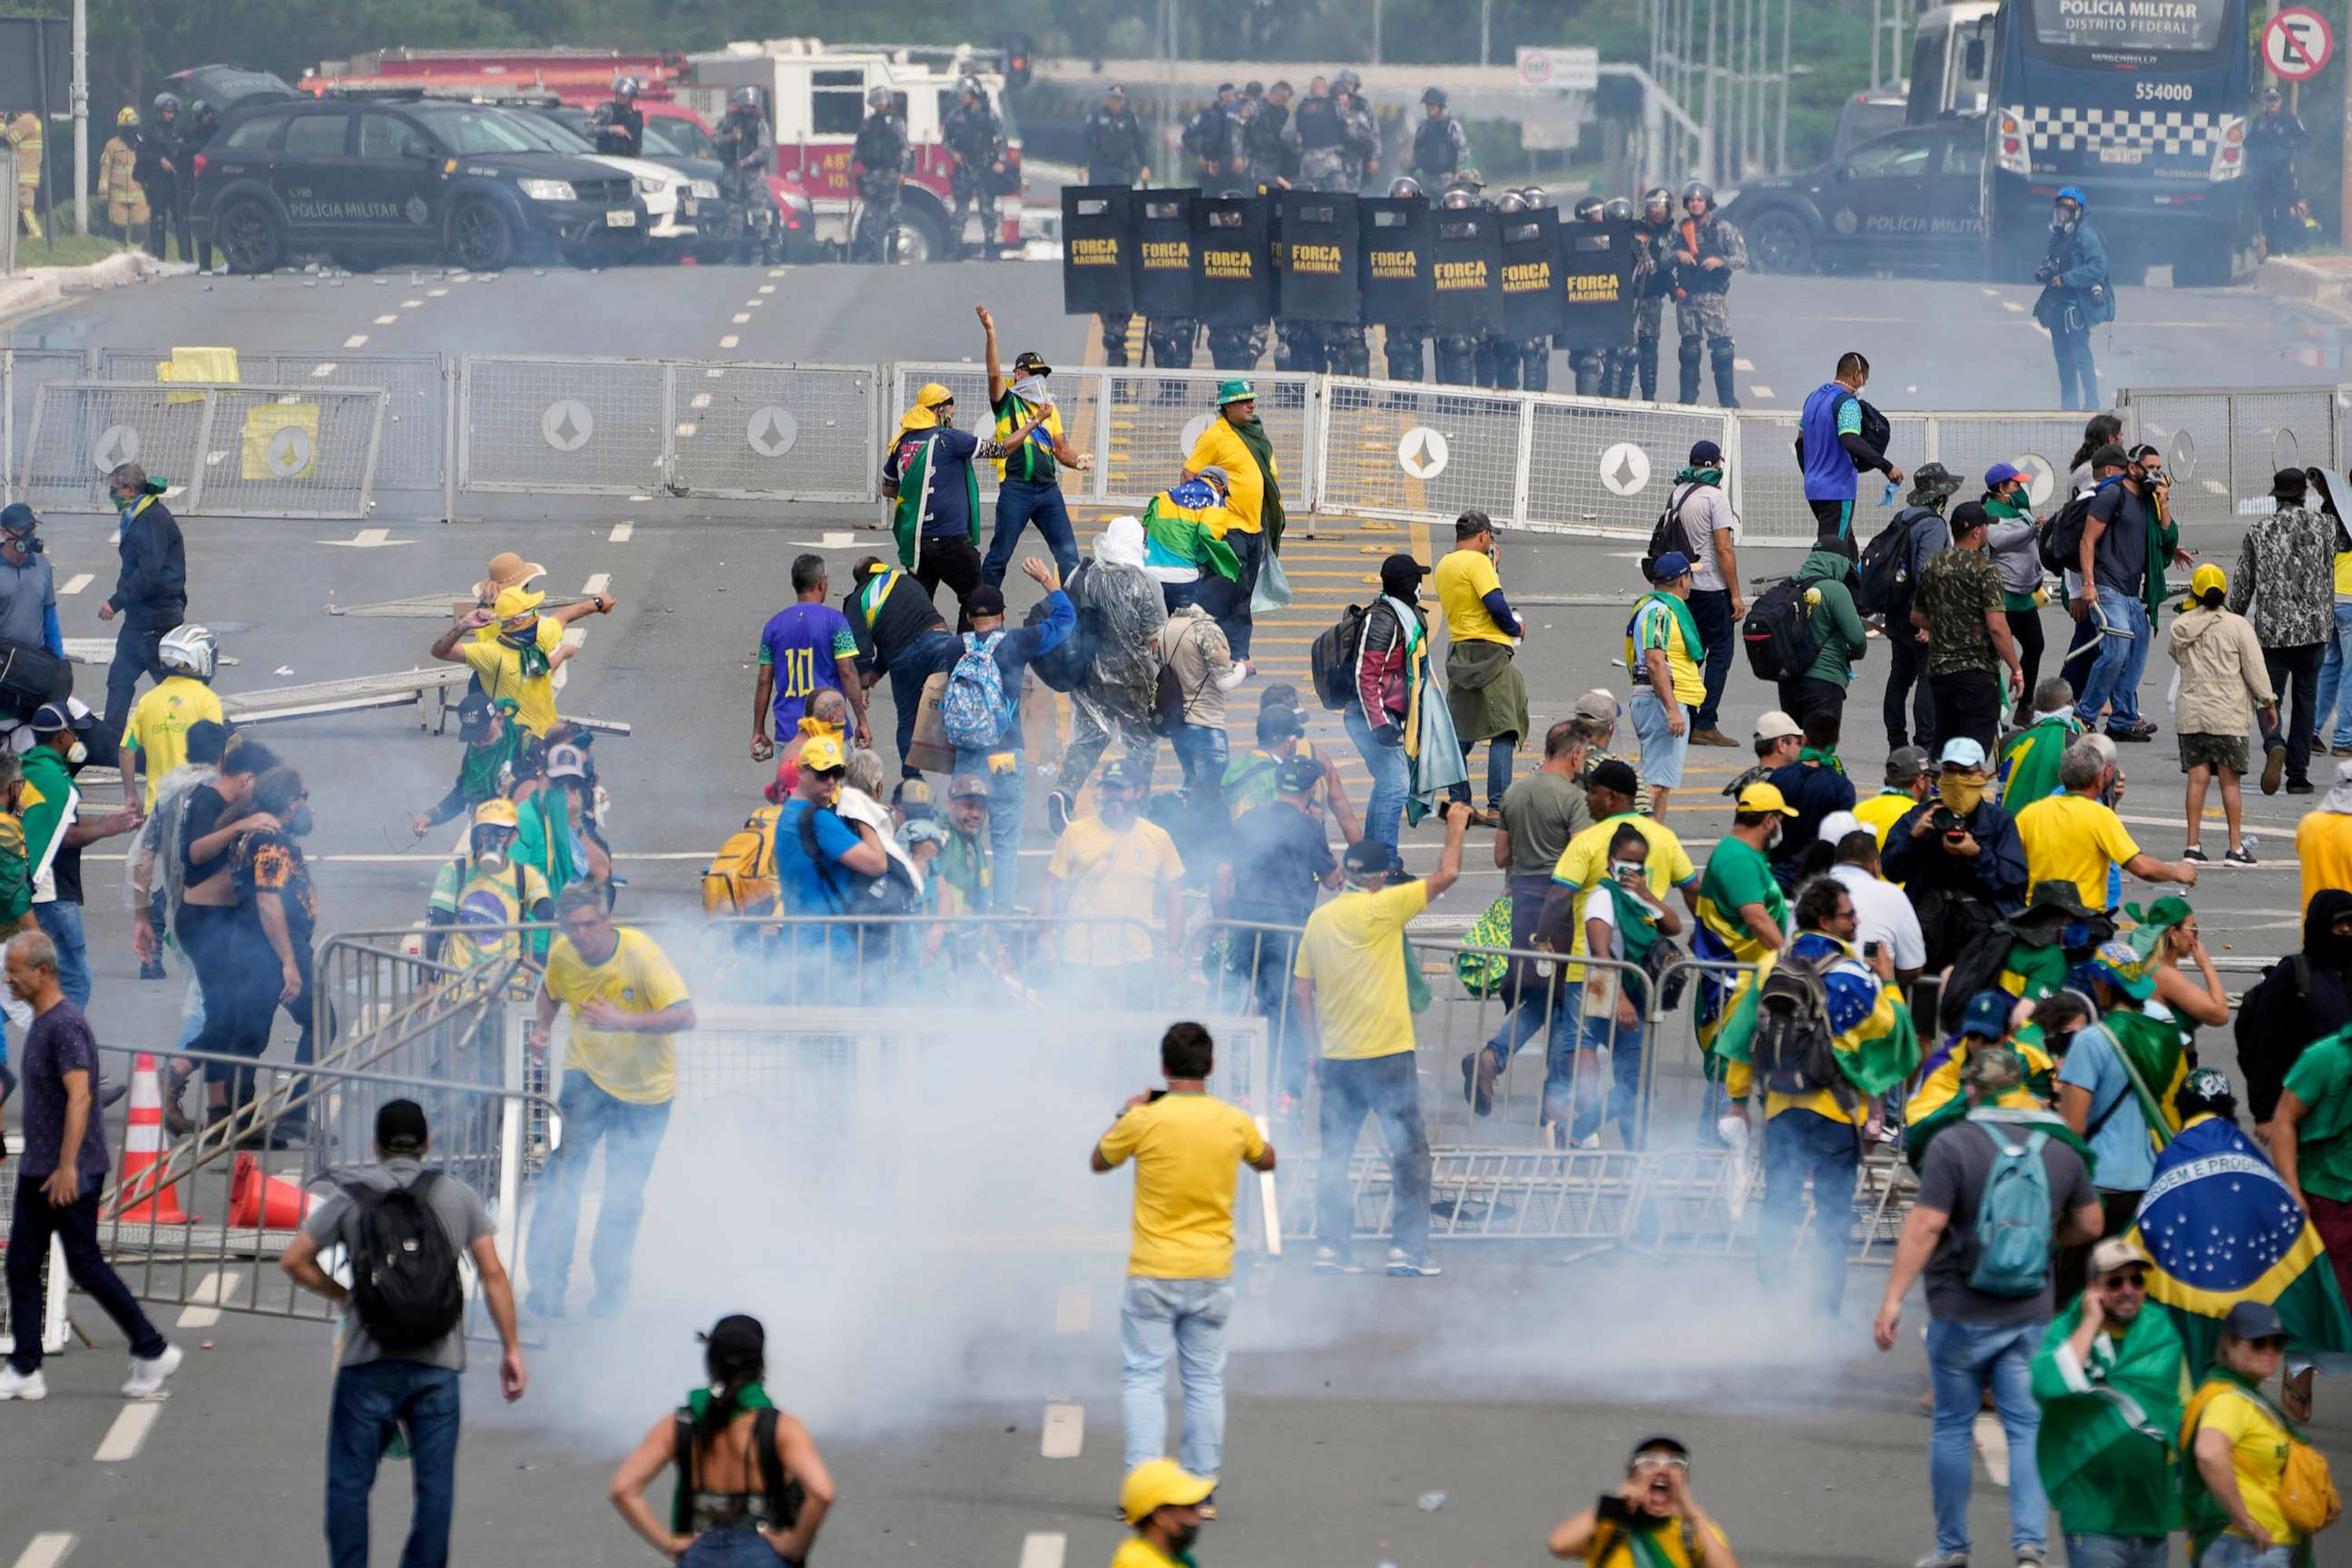 PHOTO: Protesters, supporters of former President Jair Bolsonaro, clash with police during a protest outside the Planalto Palace building in Brasilia, Brazil, Jan. 8, 2023.